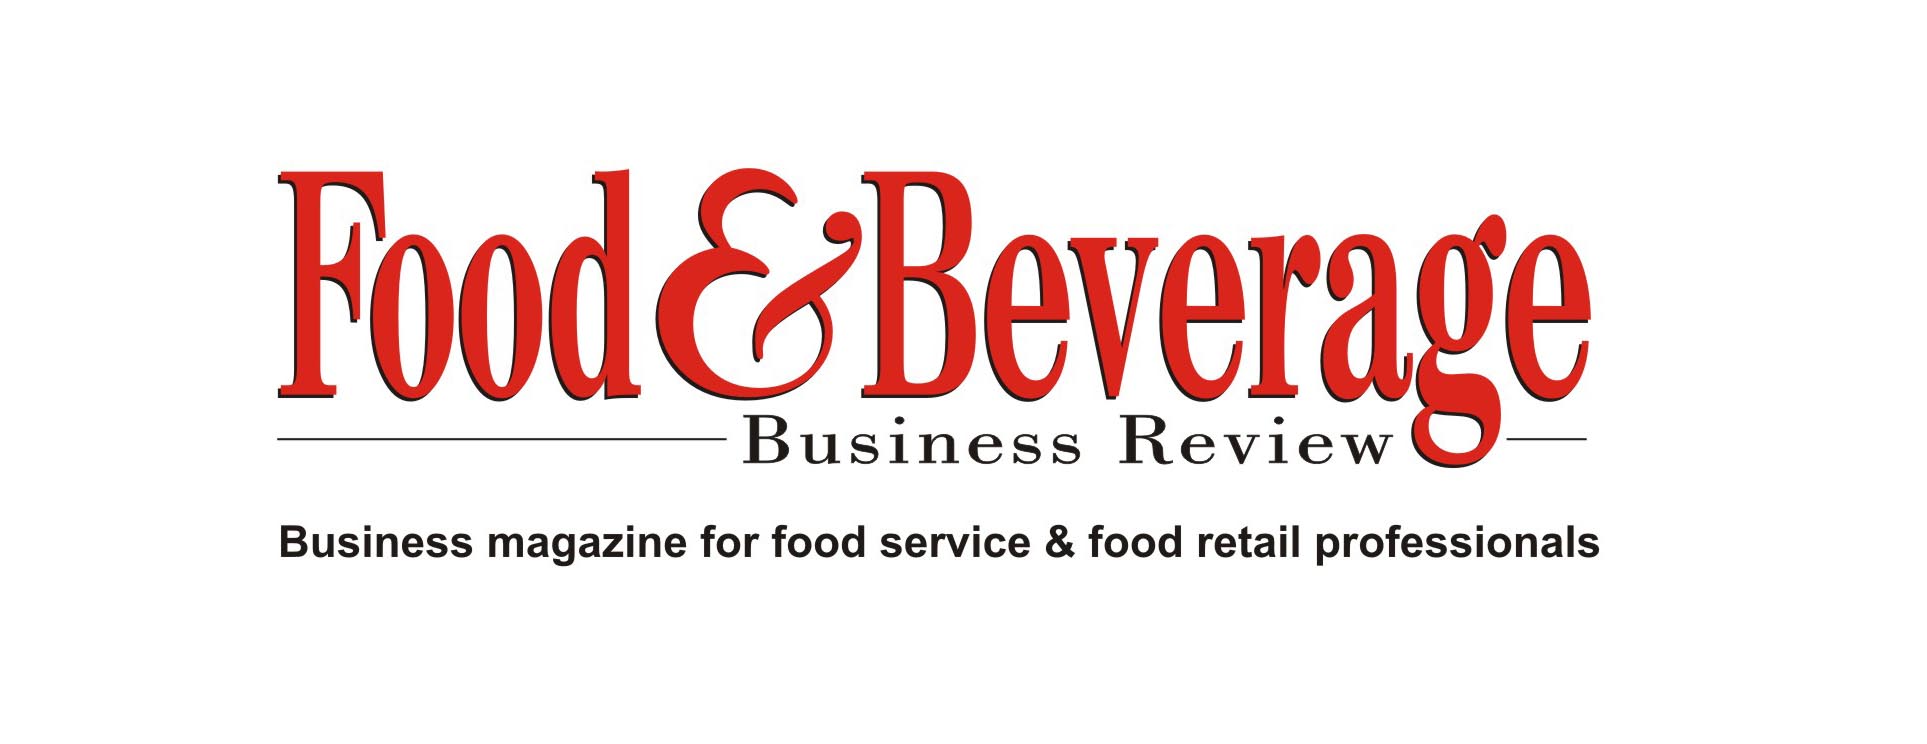 Food & Beverage Business Review